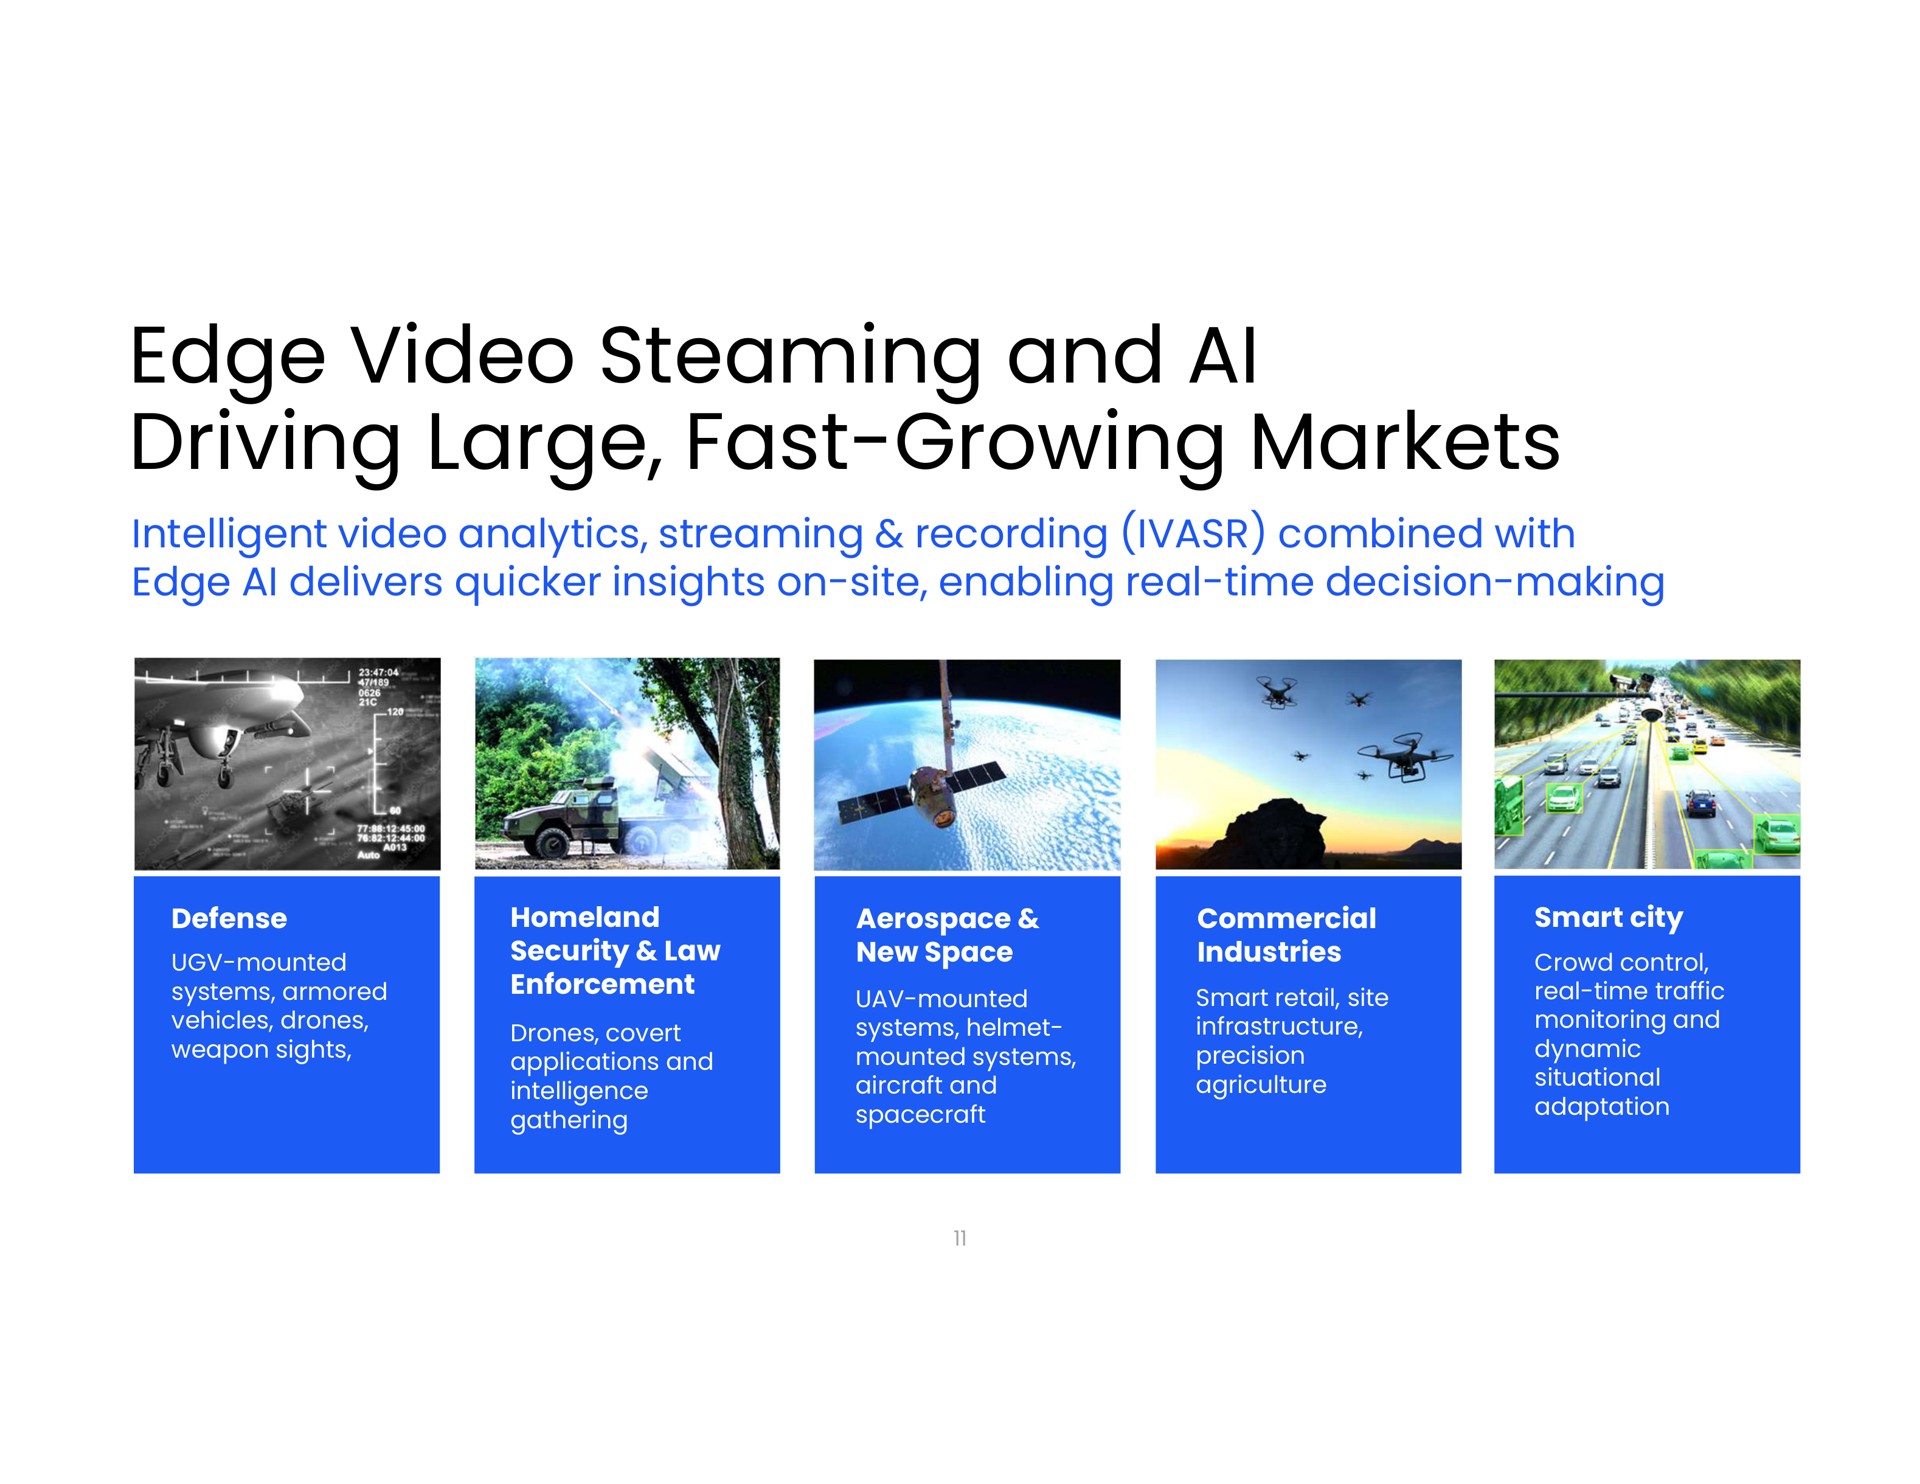 edge video steaming and driving large fast growing markets | Maris-Tech